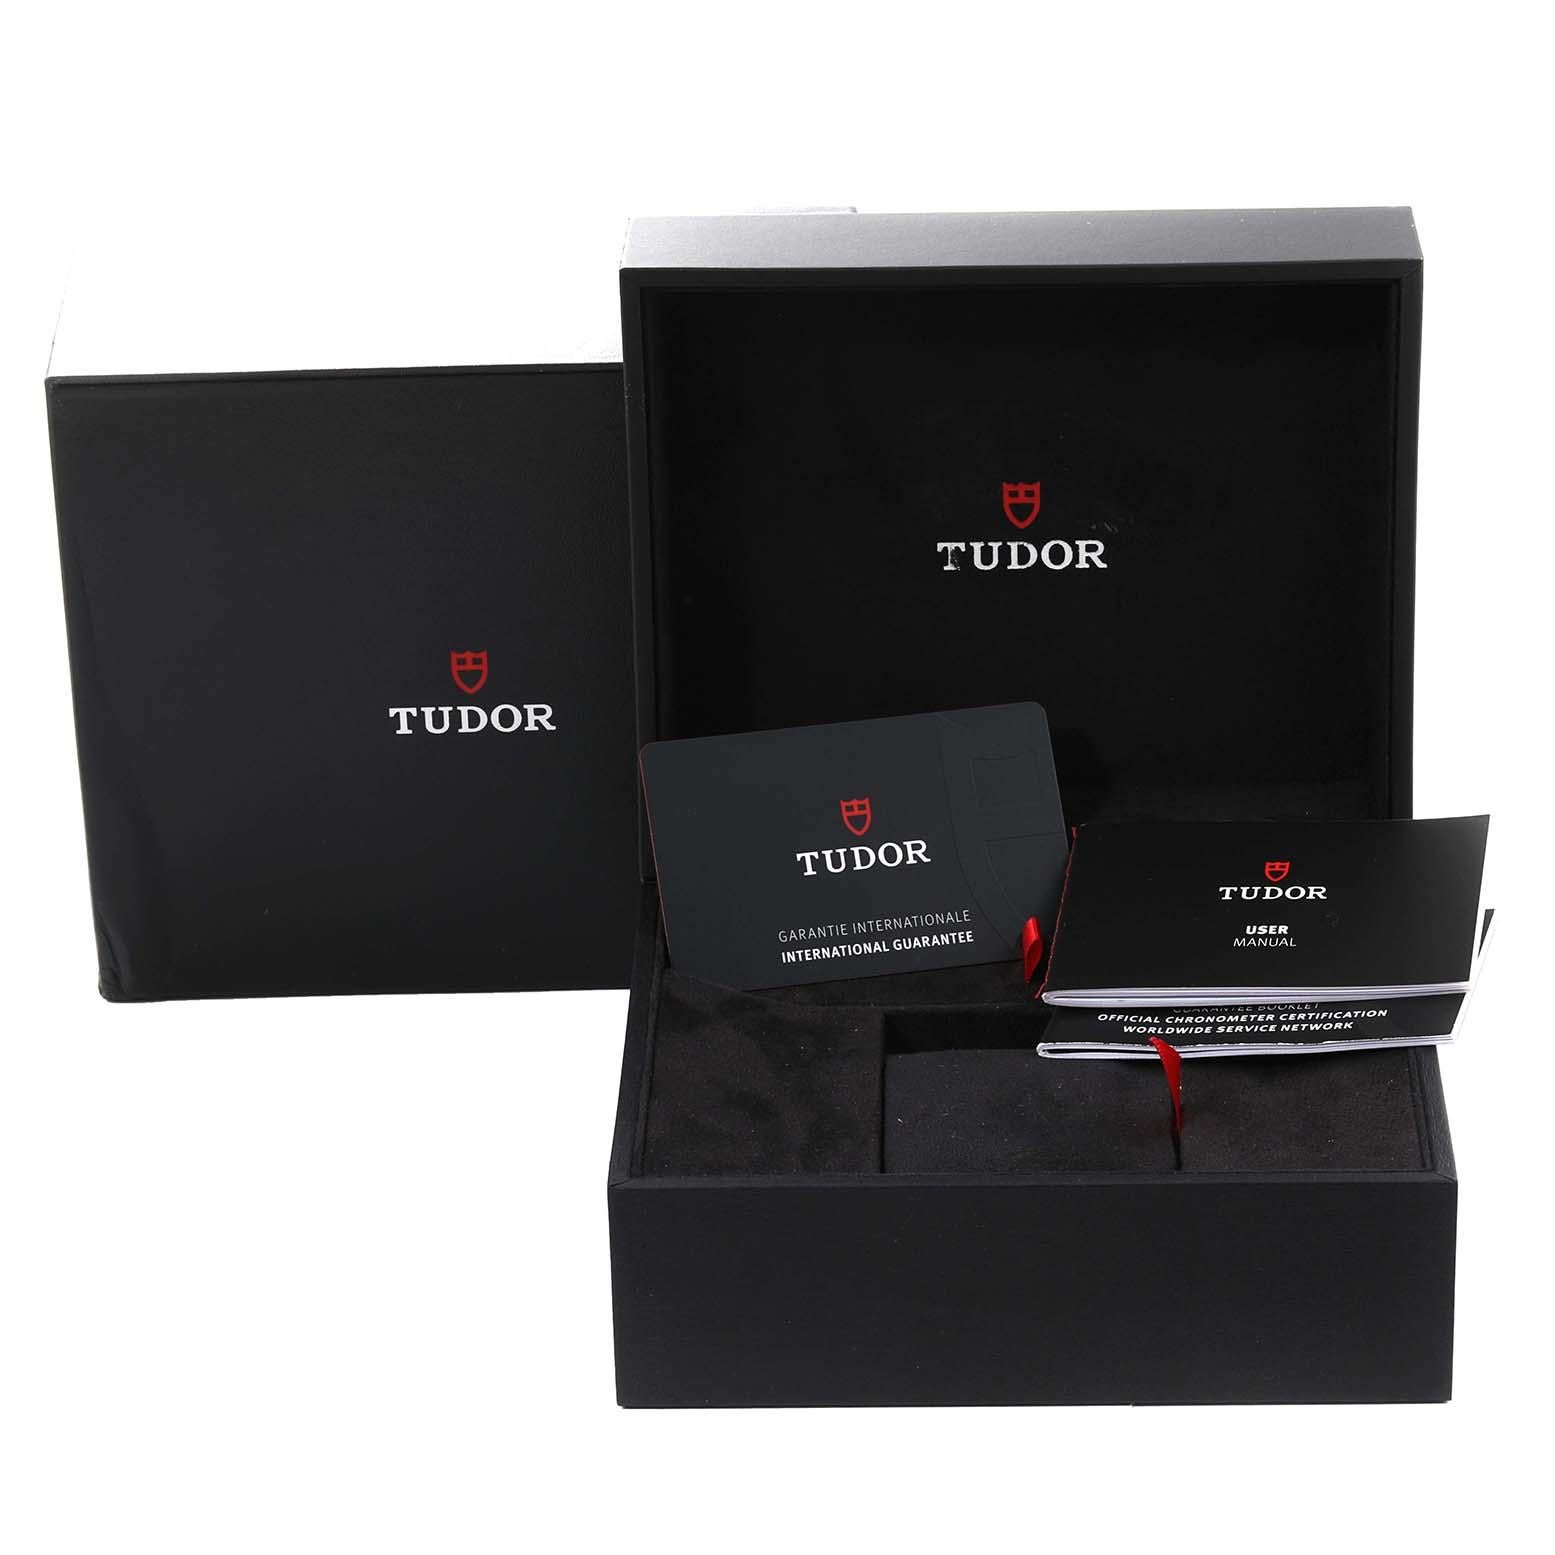 Tudor Black Bay Pro GMT Steel Mens Watch M79470 Box Card. Automatic self-winding movement. Stainless steel case 39.0 mm in diameter. Stainless steel 24 hour graduated bezel with satin finish. Scratch resistant sapphire crystal. Black dial with